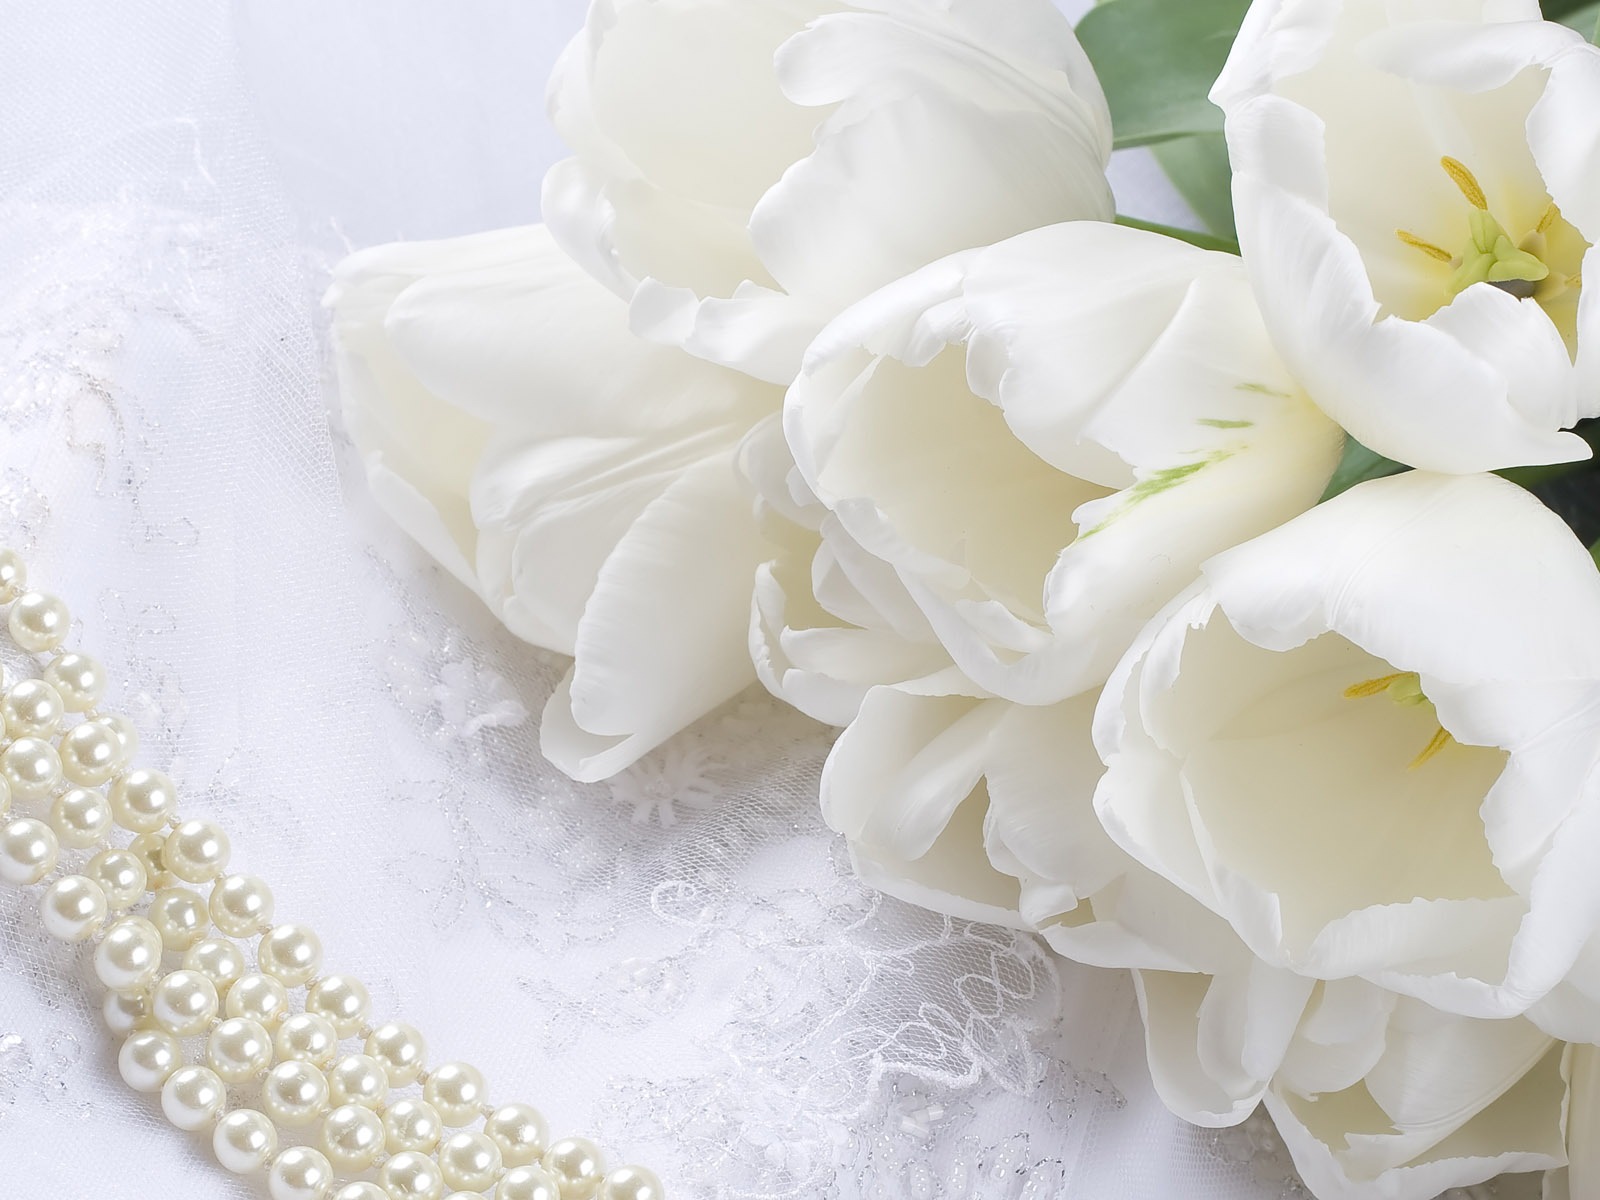 Weddings and Flowers wallpaper (1) #3 - 1600x1200